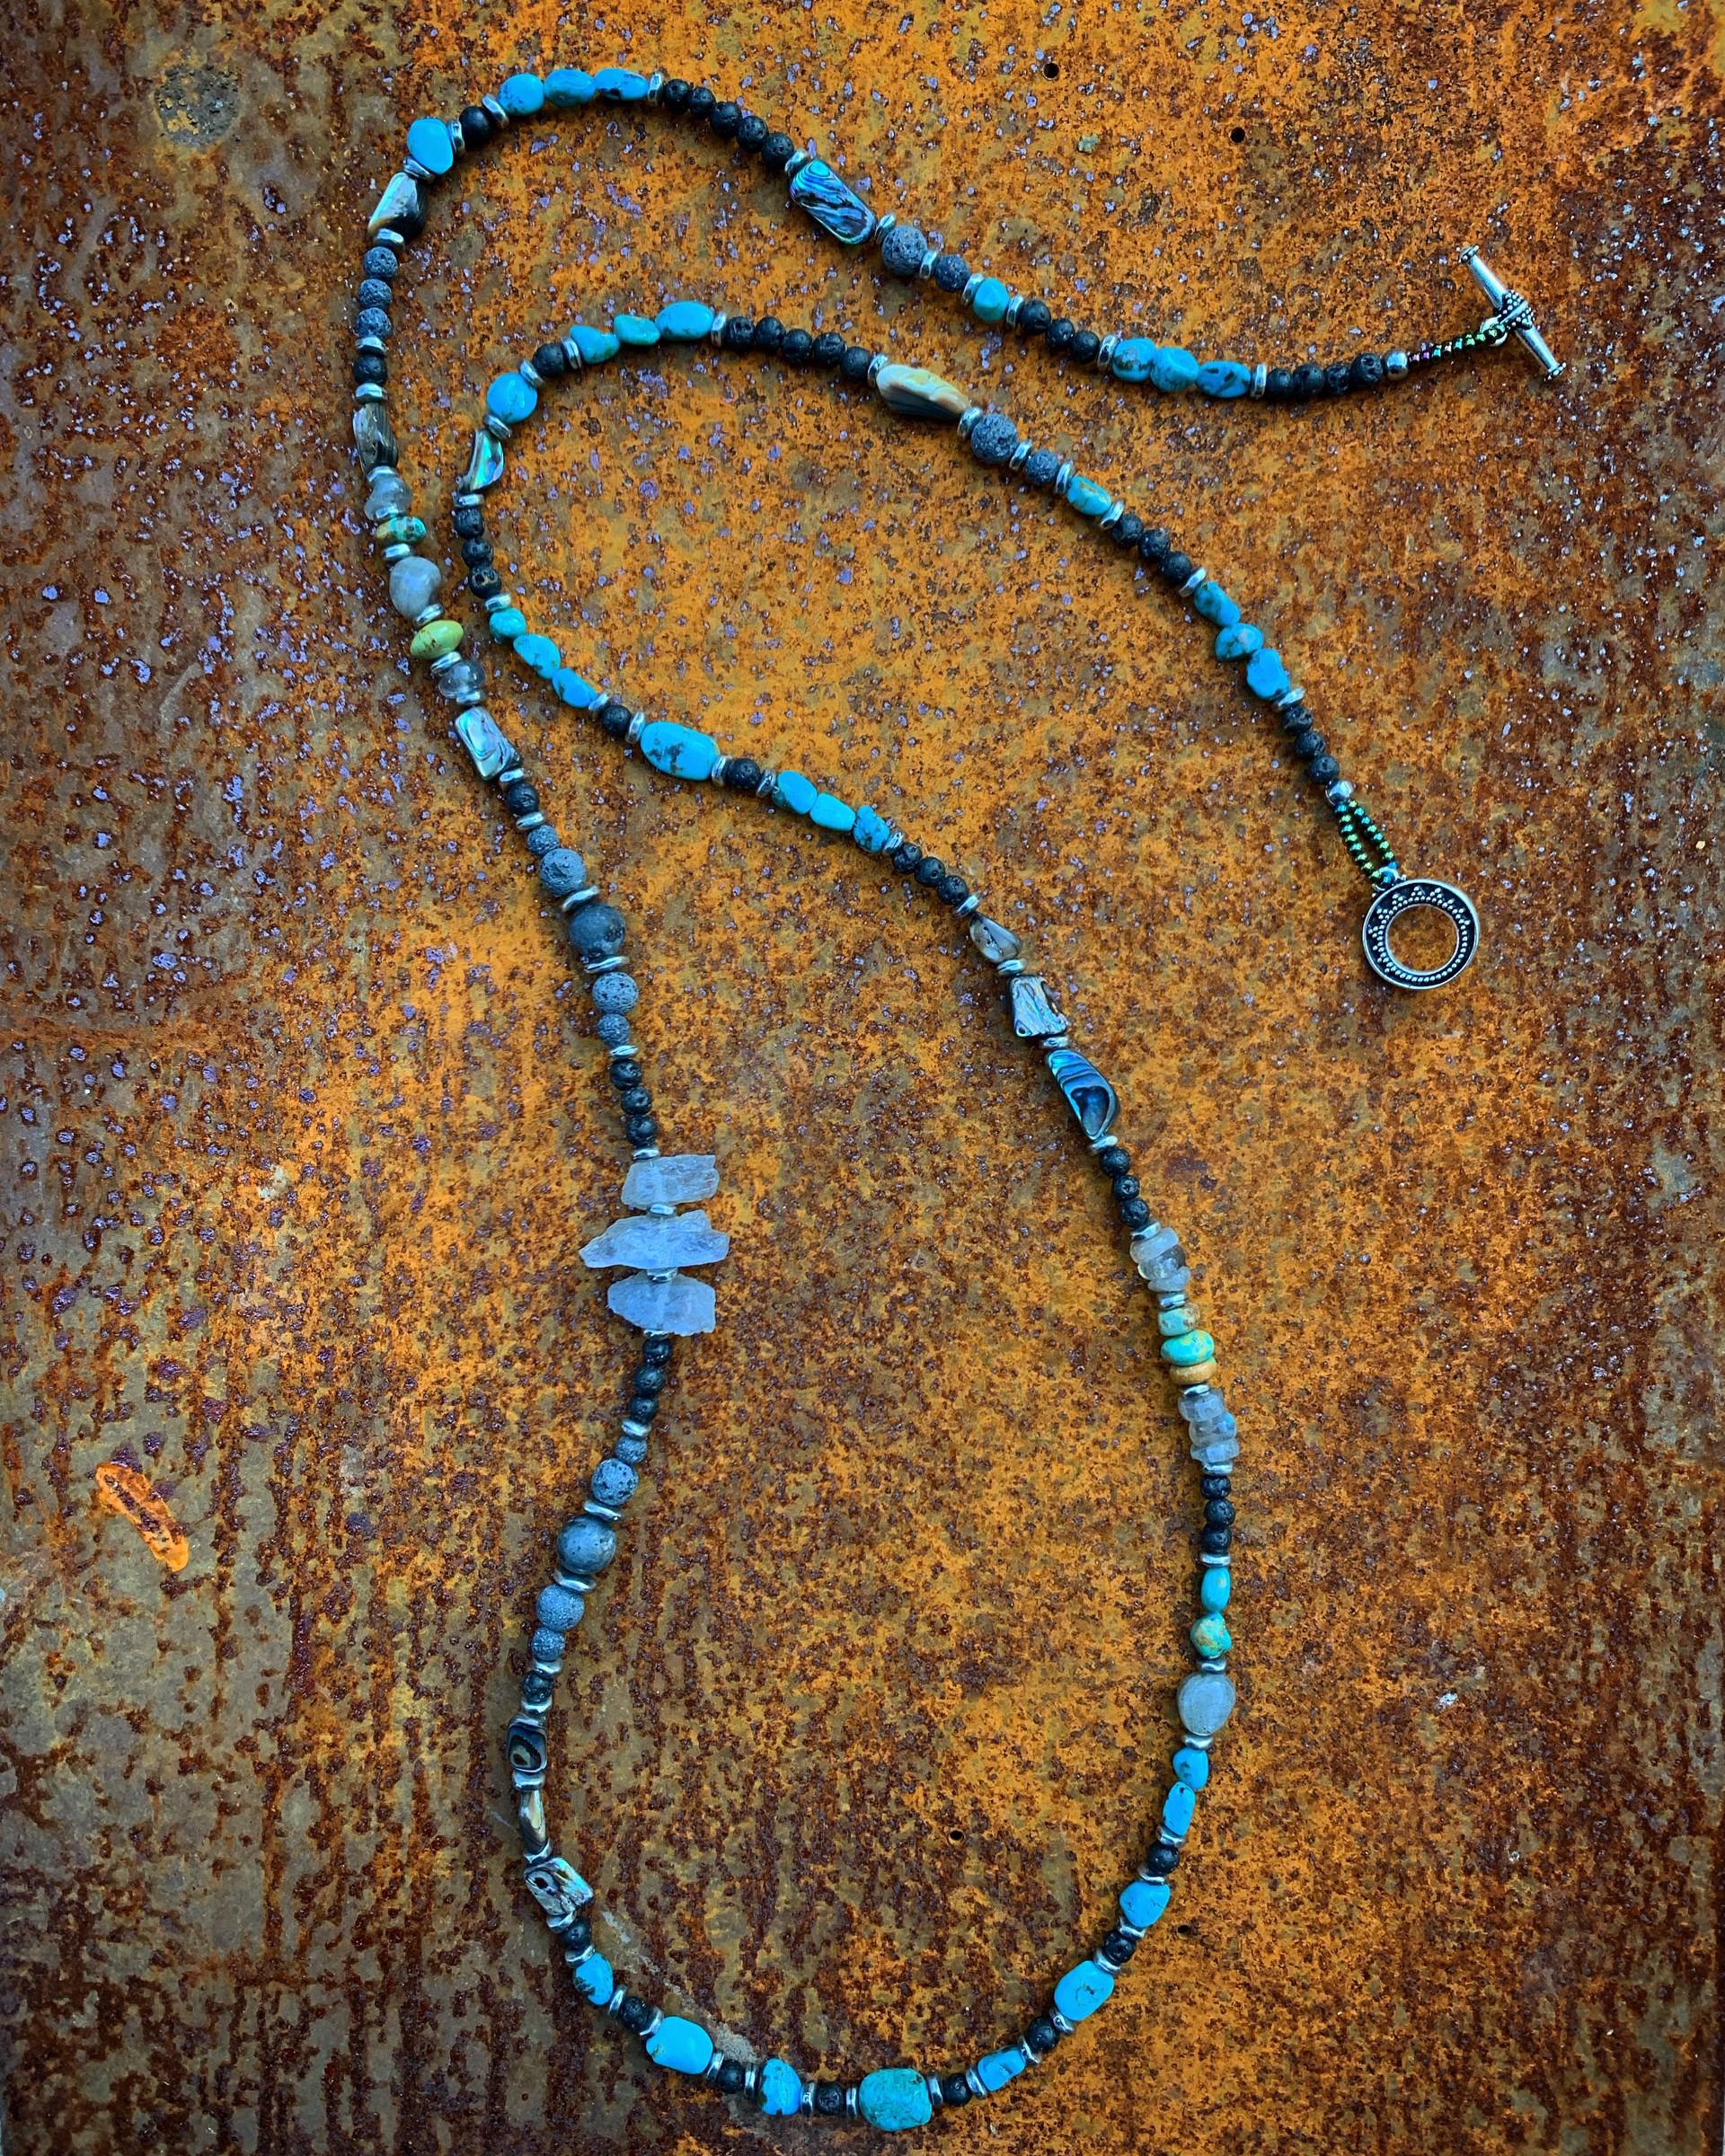 K481 Labradorite and Turuqoise Chain Necklace by Kelly Ormsby